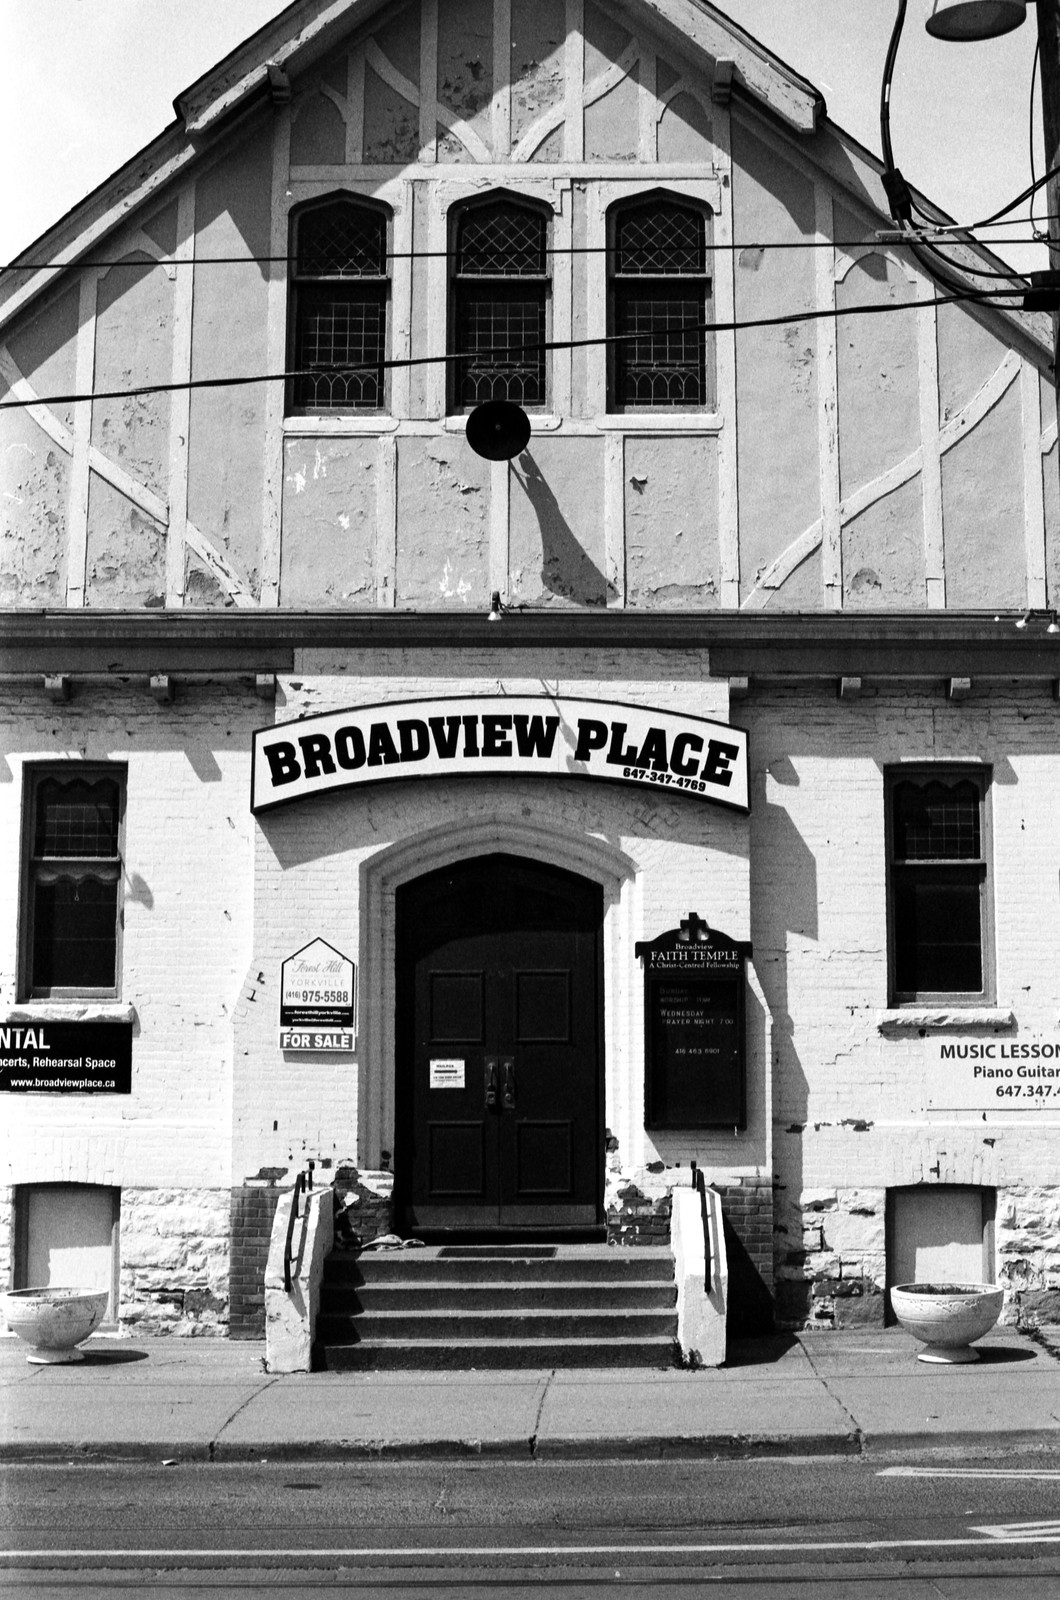 Broadview Place